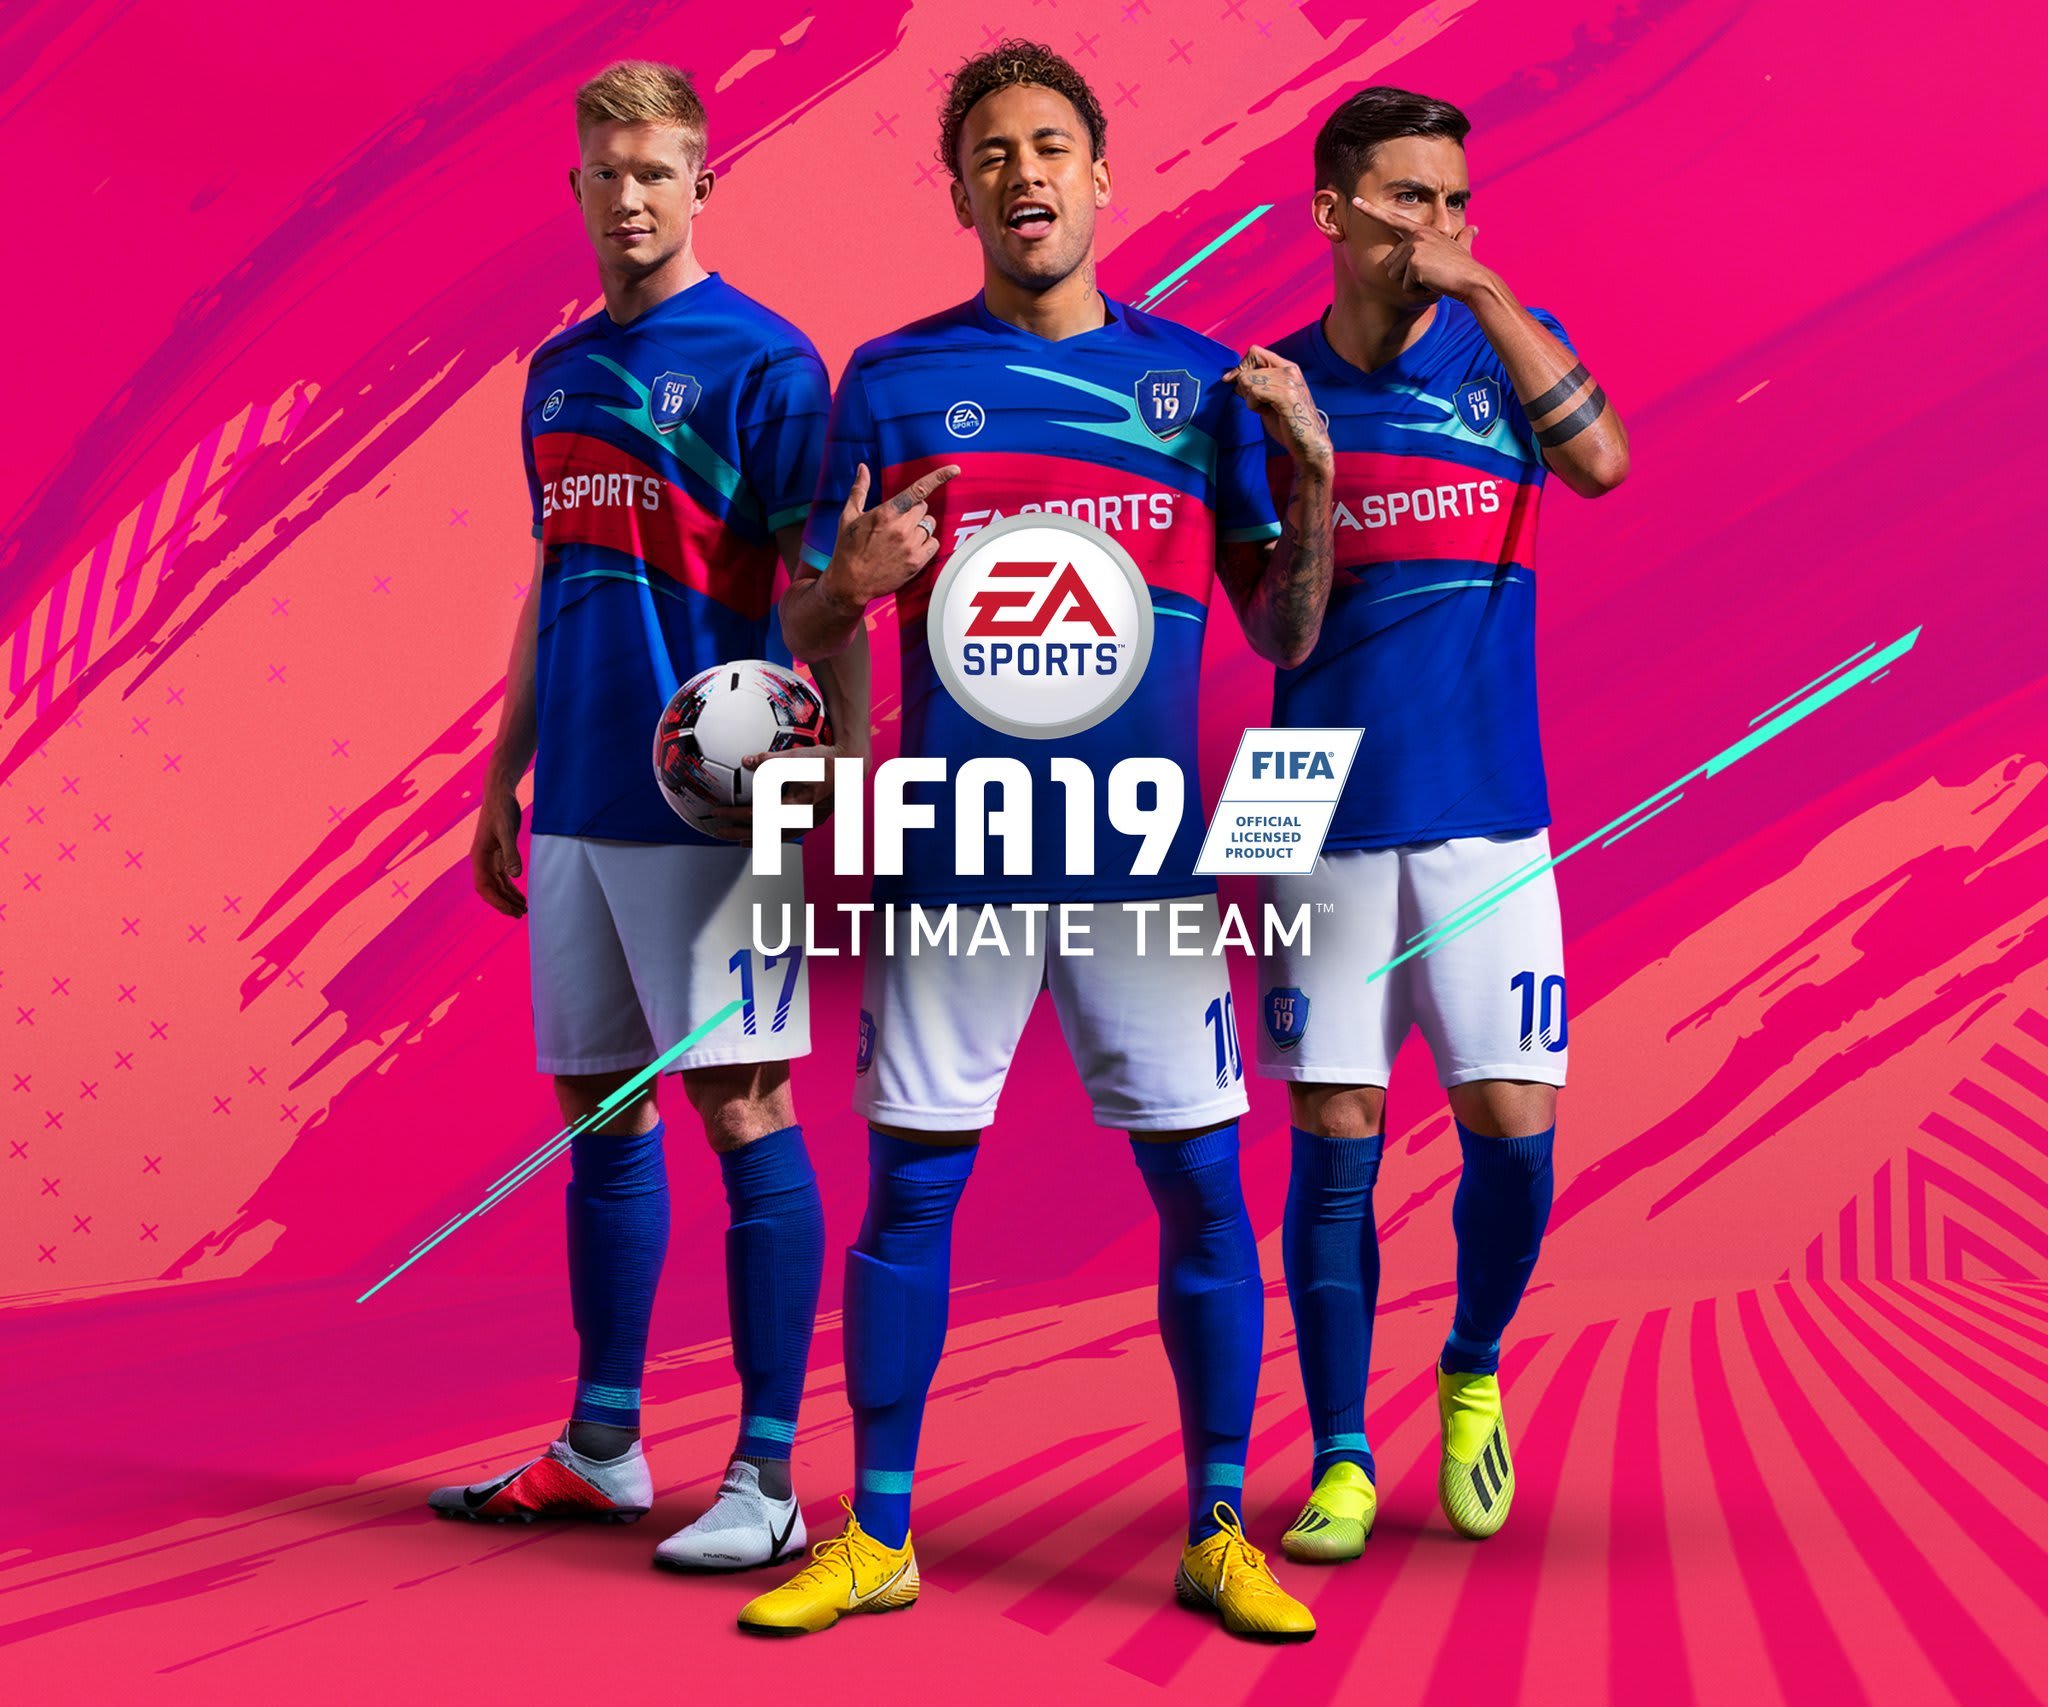 market guide to fifa 19 ultimate team 